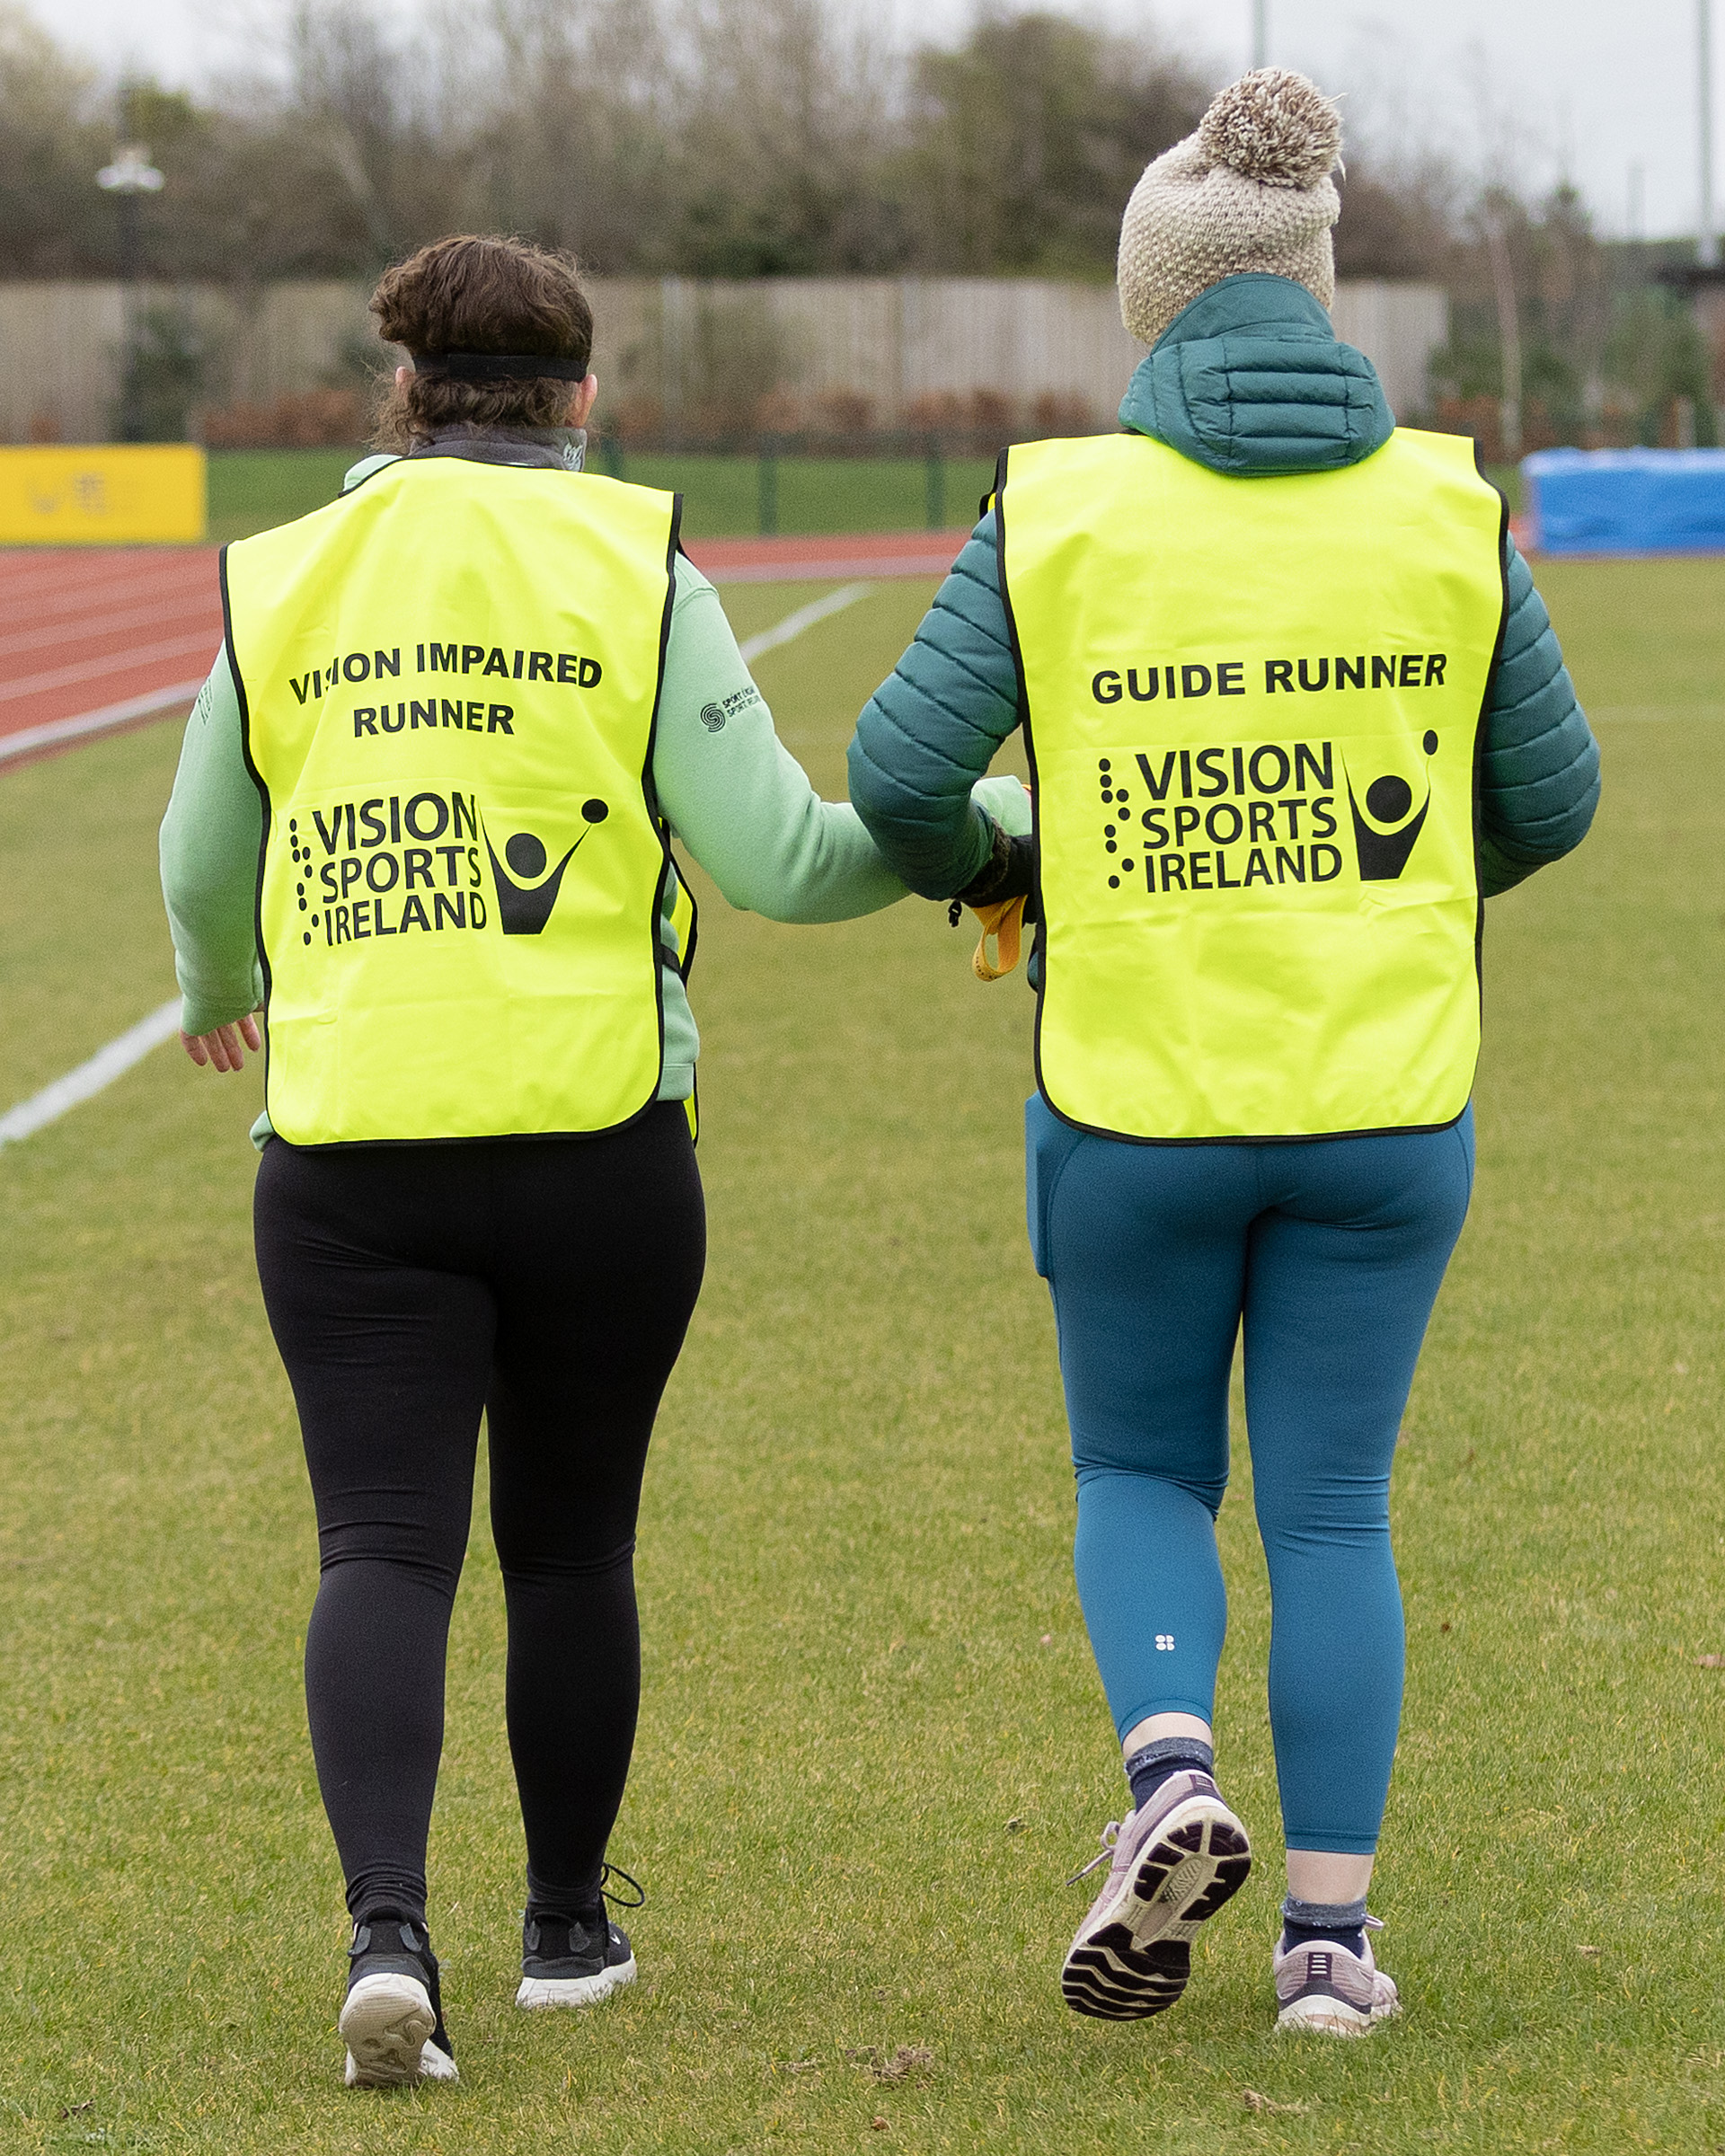 Two participants in the Guide Running Workshop. One is wearing a VI runner yellow bib and the other participant is wearing a guide runner yellow bib